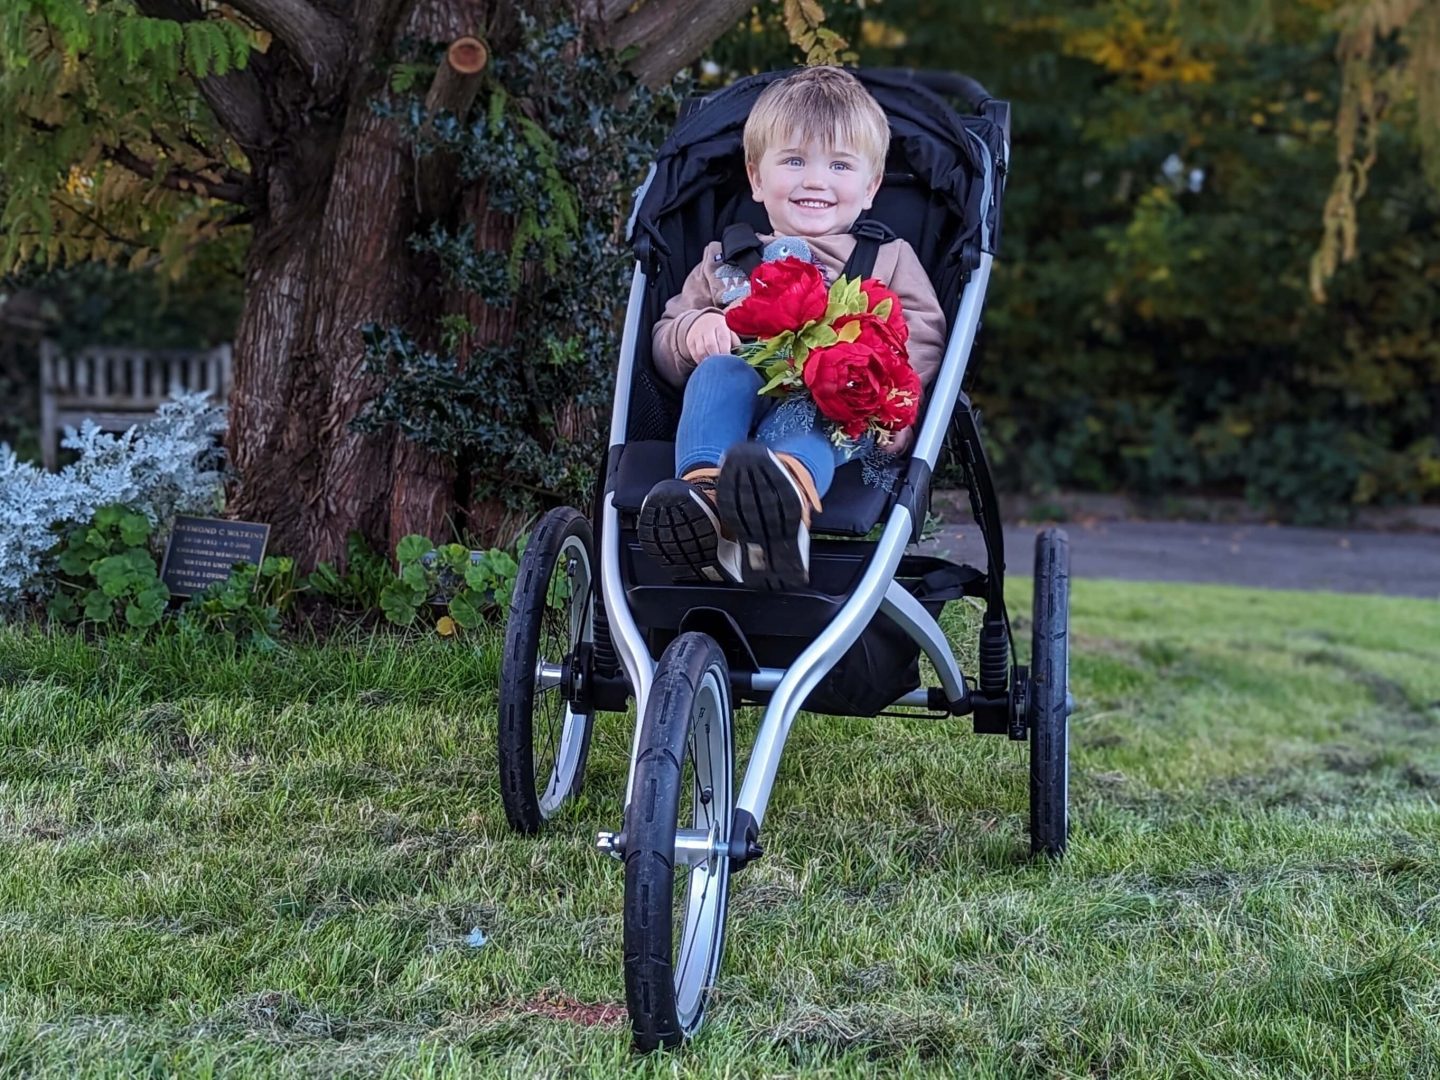 Little boy sitting in a Thule Glide 2 running buggy smiling and holding red flowers